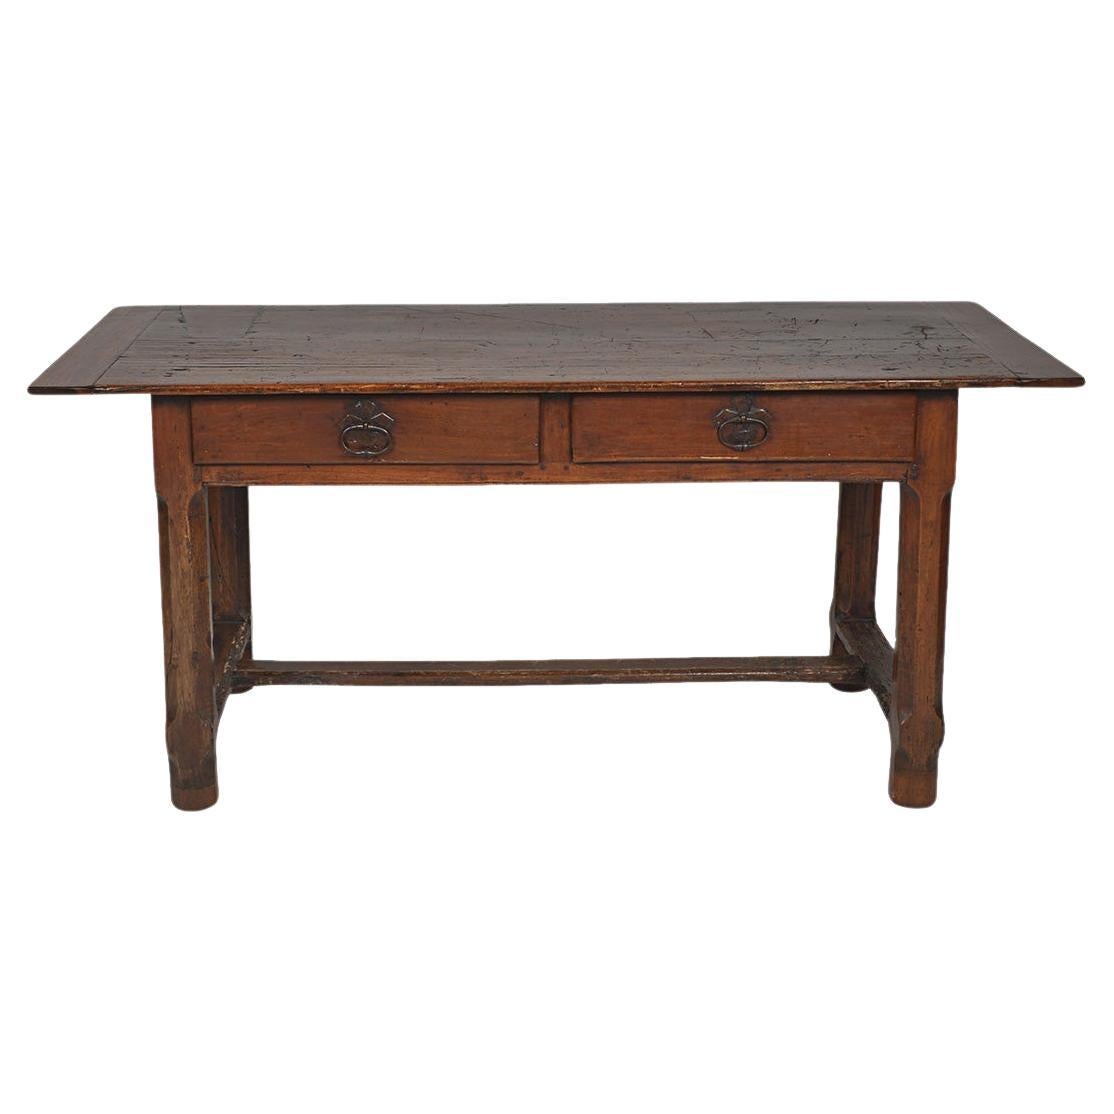 1880 Dining Table / Desk Table